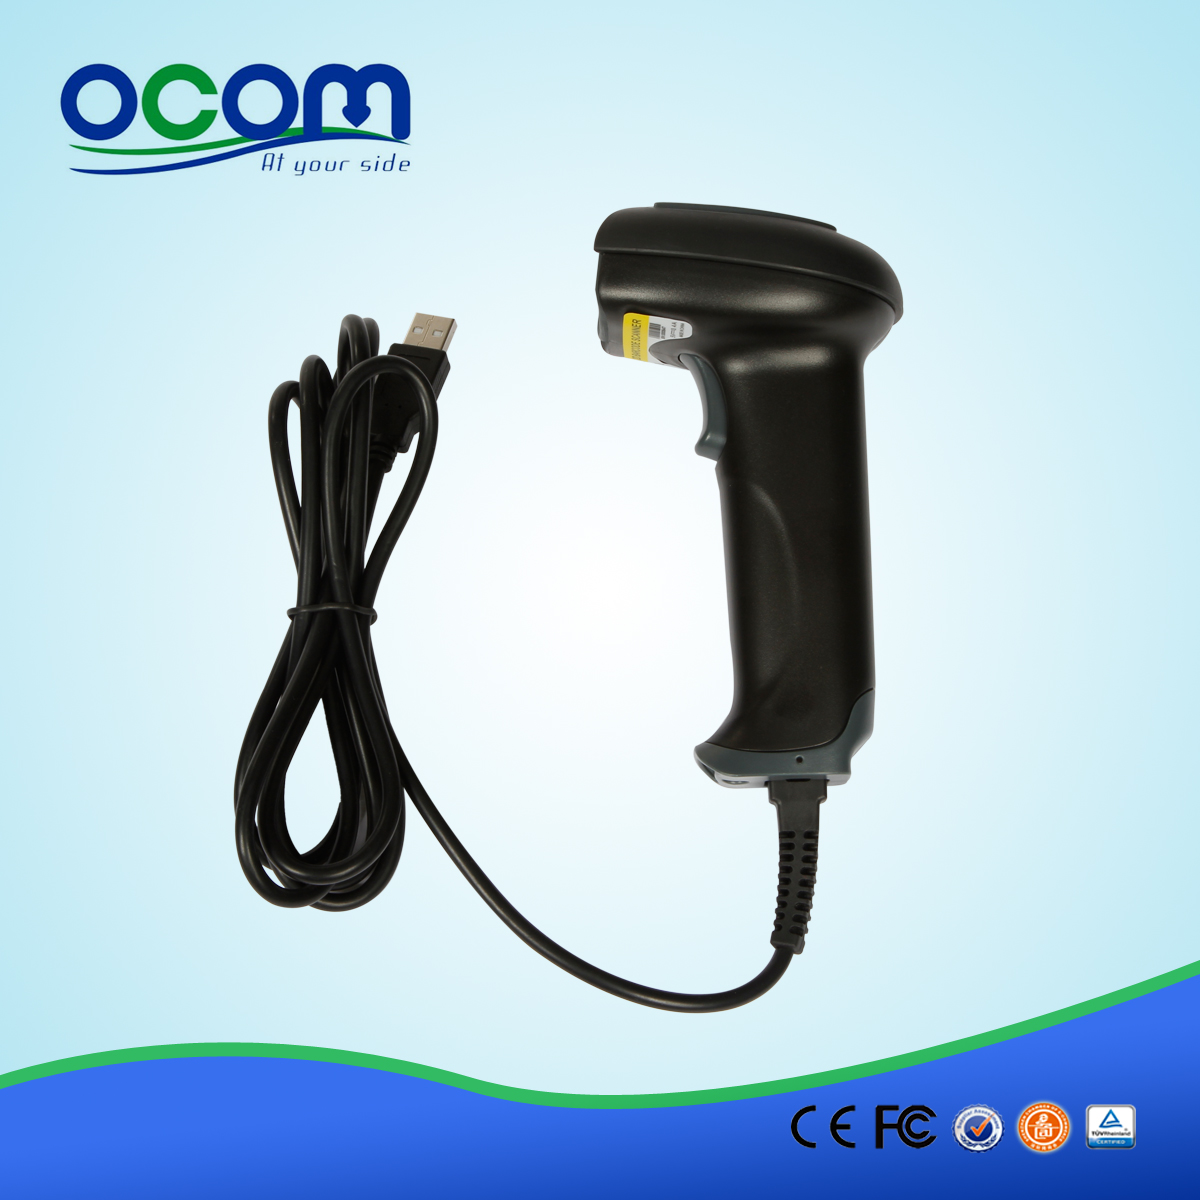 High quality and sensitive Handheld Mini 1d/2d barcode reader